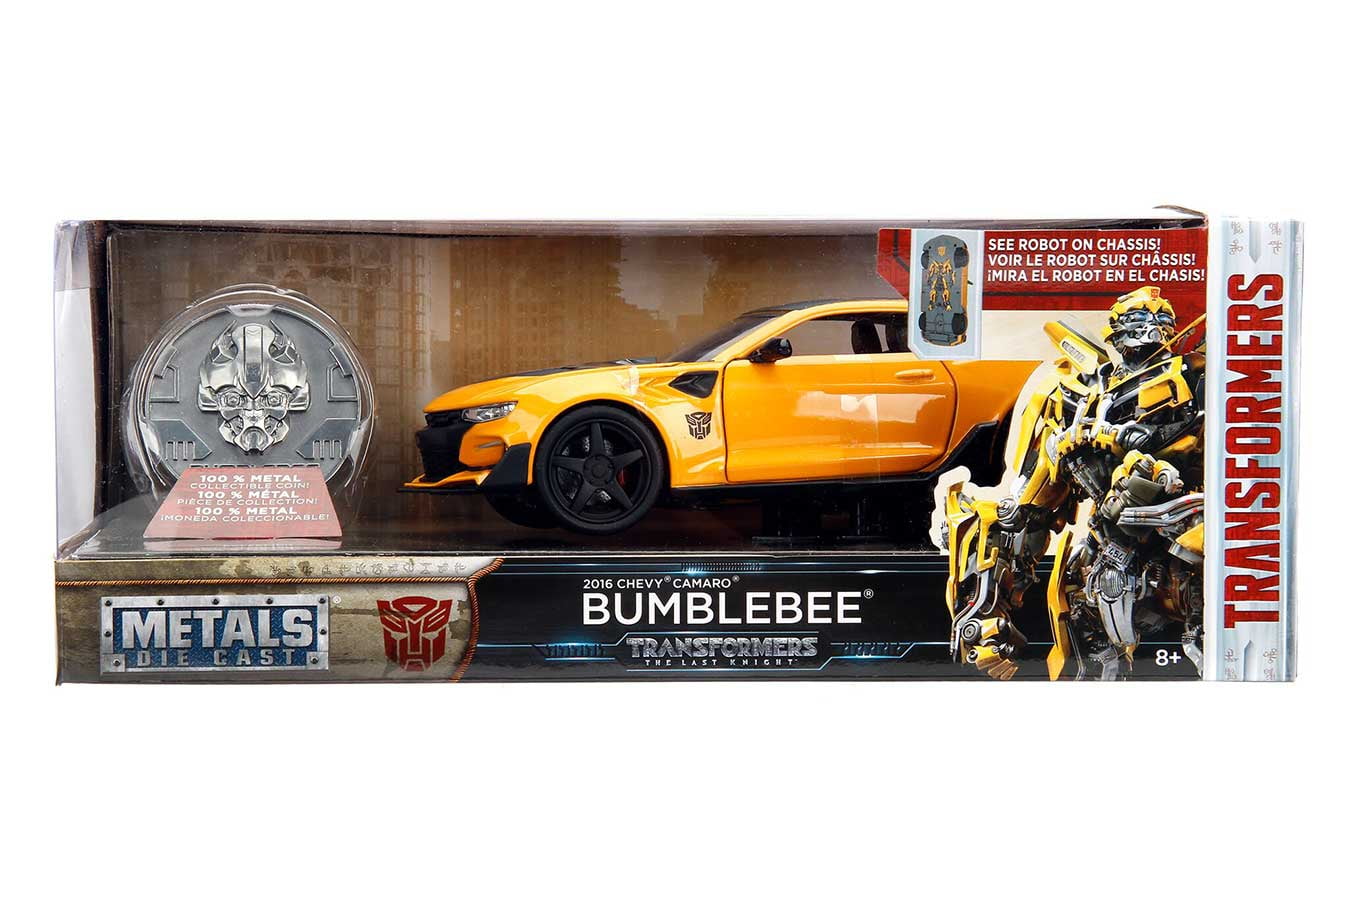 New in box Hollywood Rides 2016 Chevy Camaro Bumblebee 1/32 